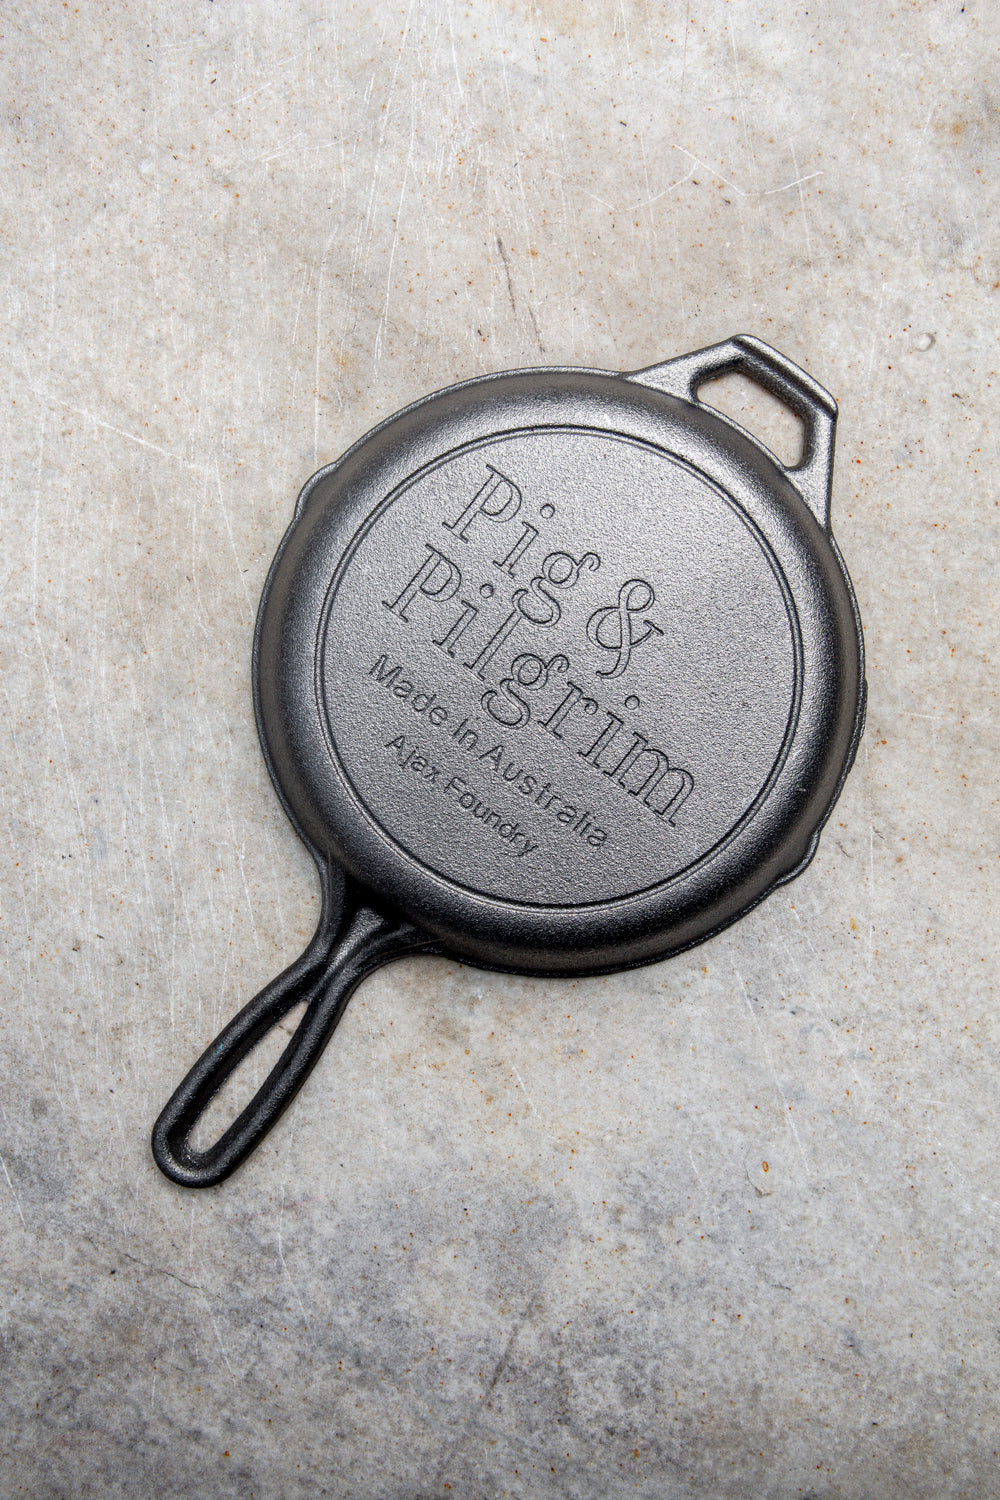 Cast Iron Pan Two-Pack